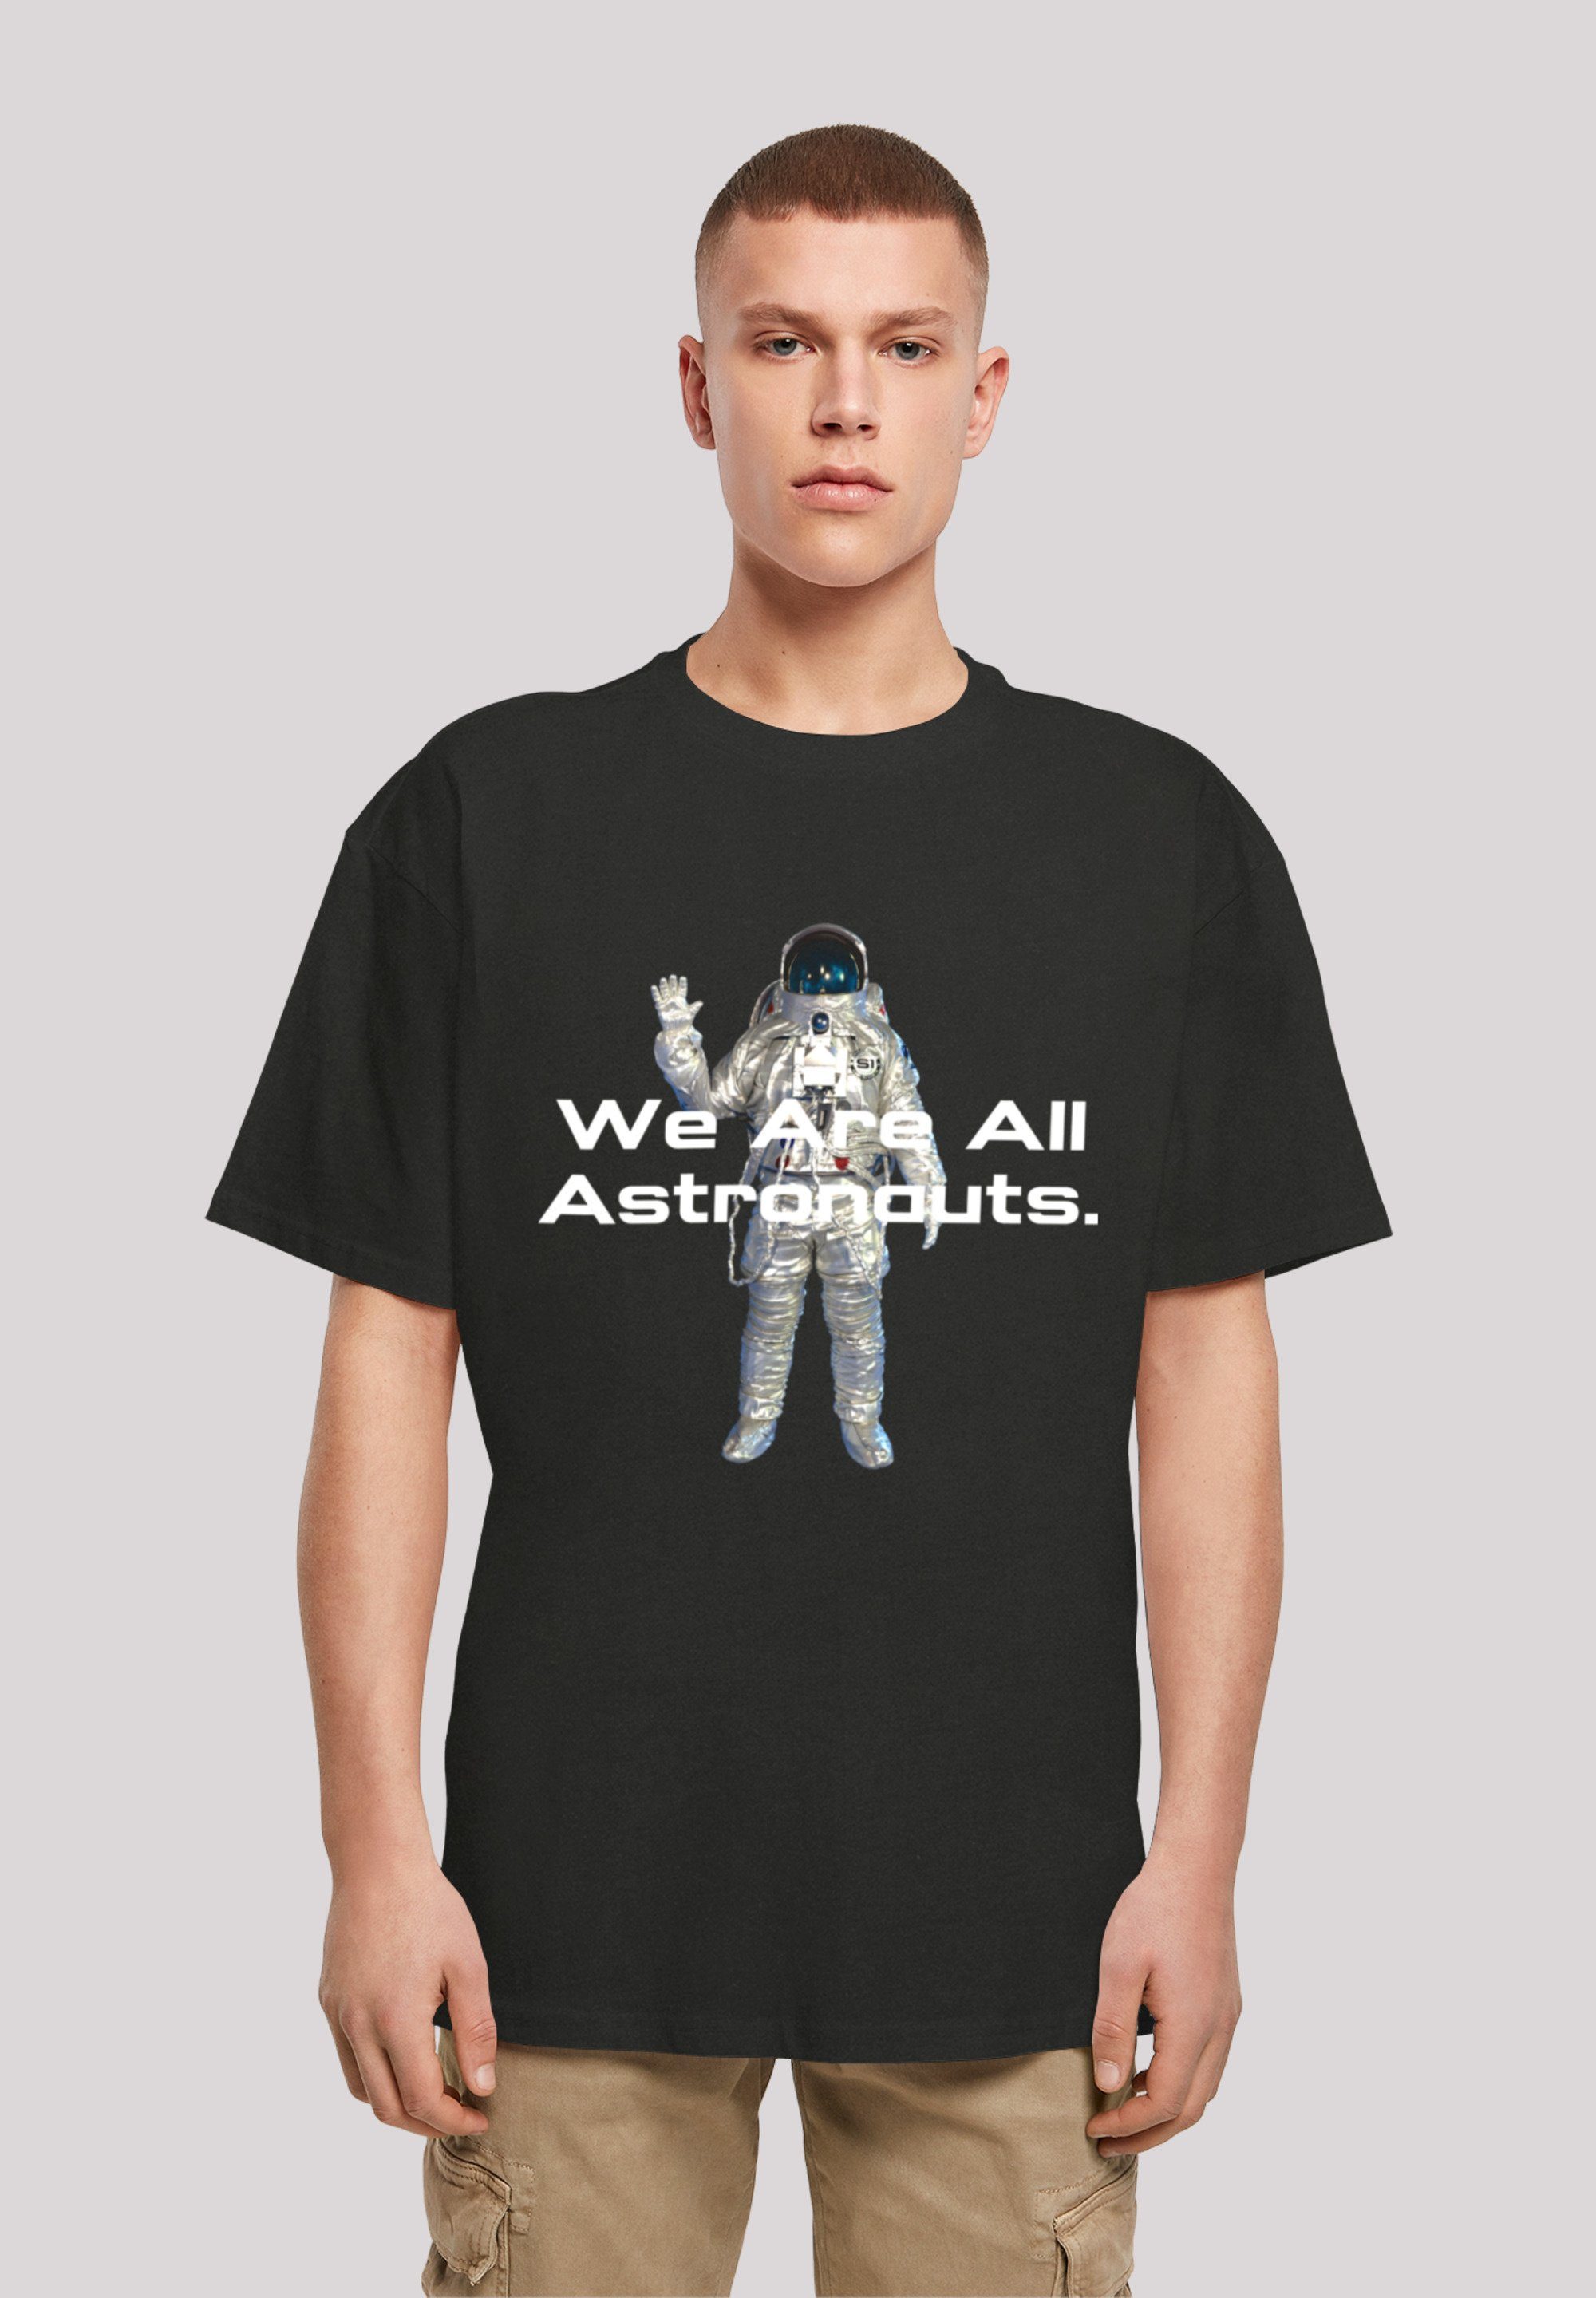 all Print T-Shirt SpaceOne PHIBER are astronauts schwarz F4NT4STIC We